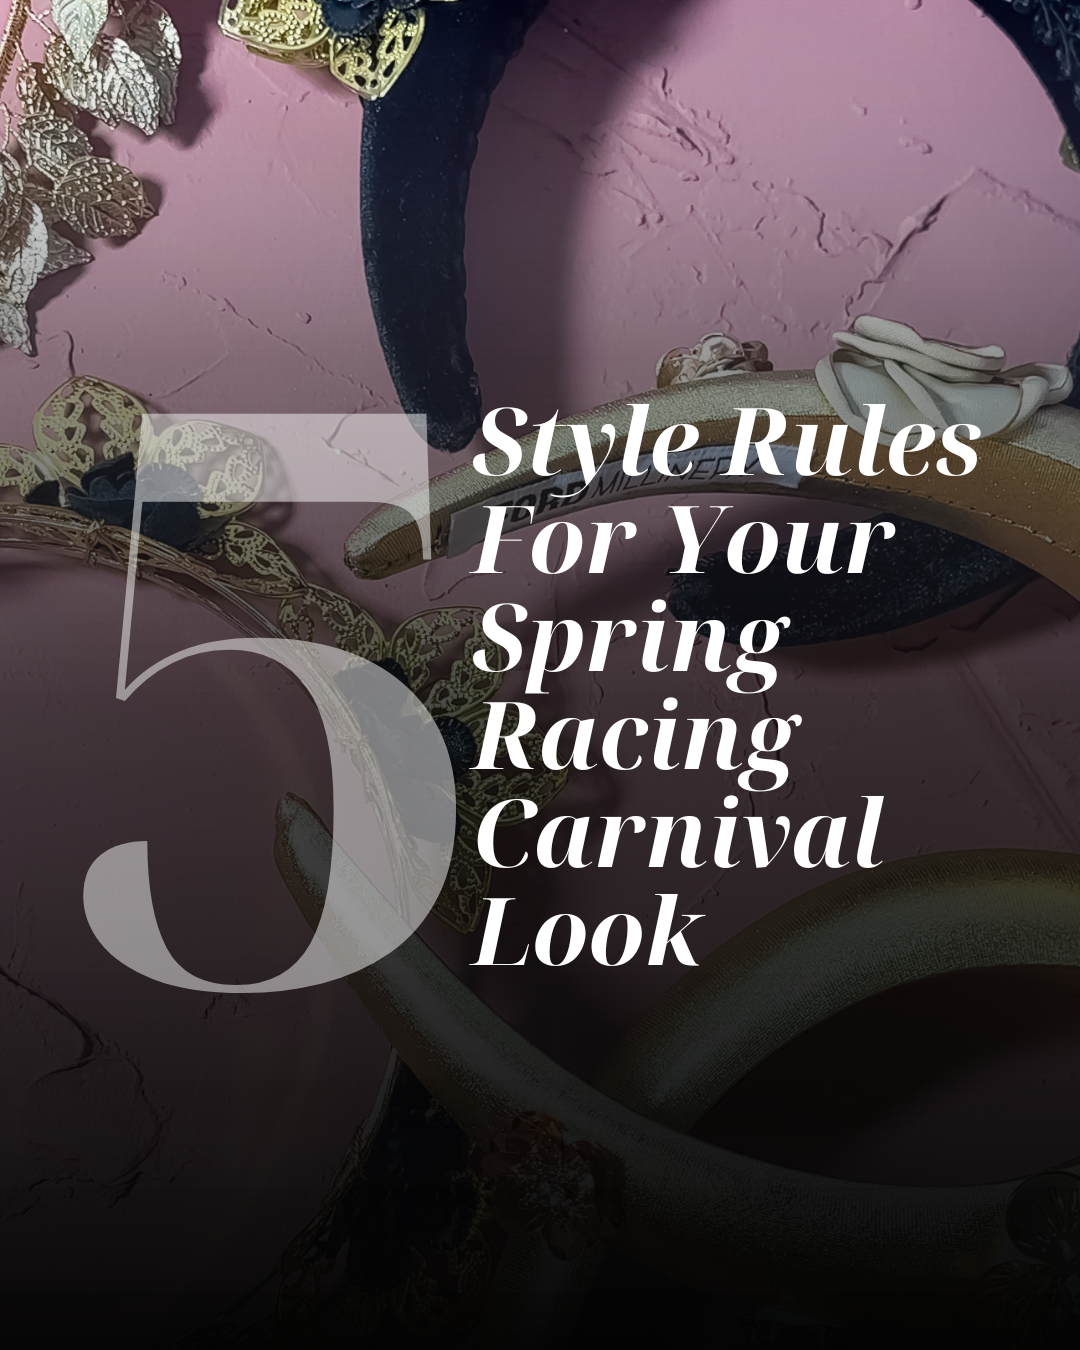 Ace Spring Racing Fashion 2023 With These 5 Rules